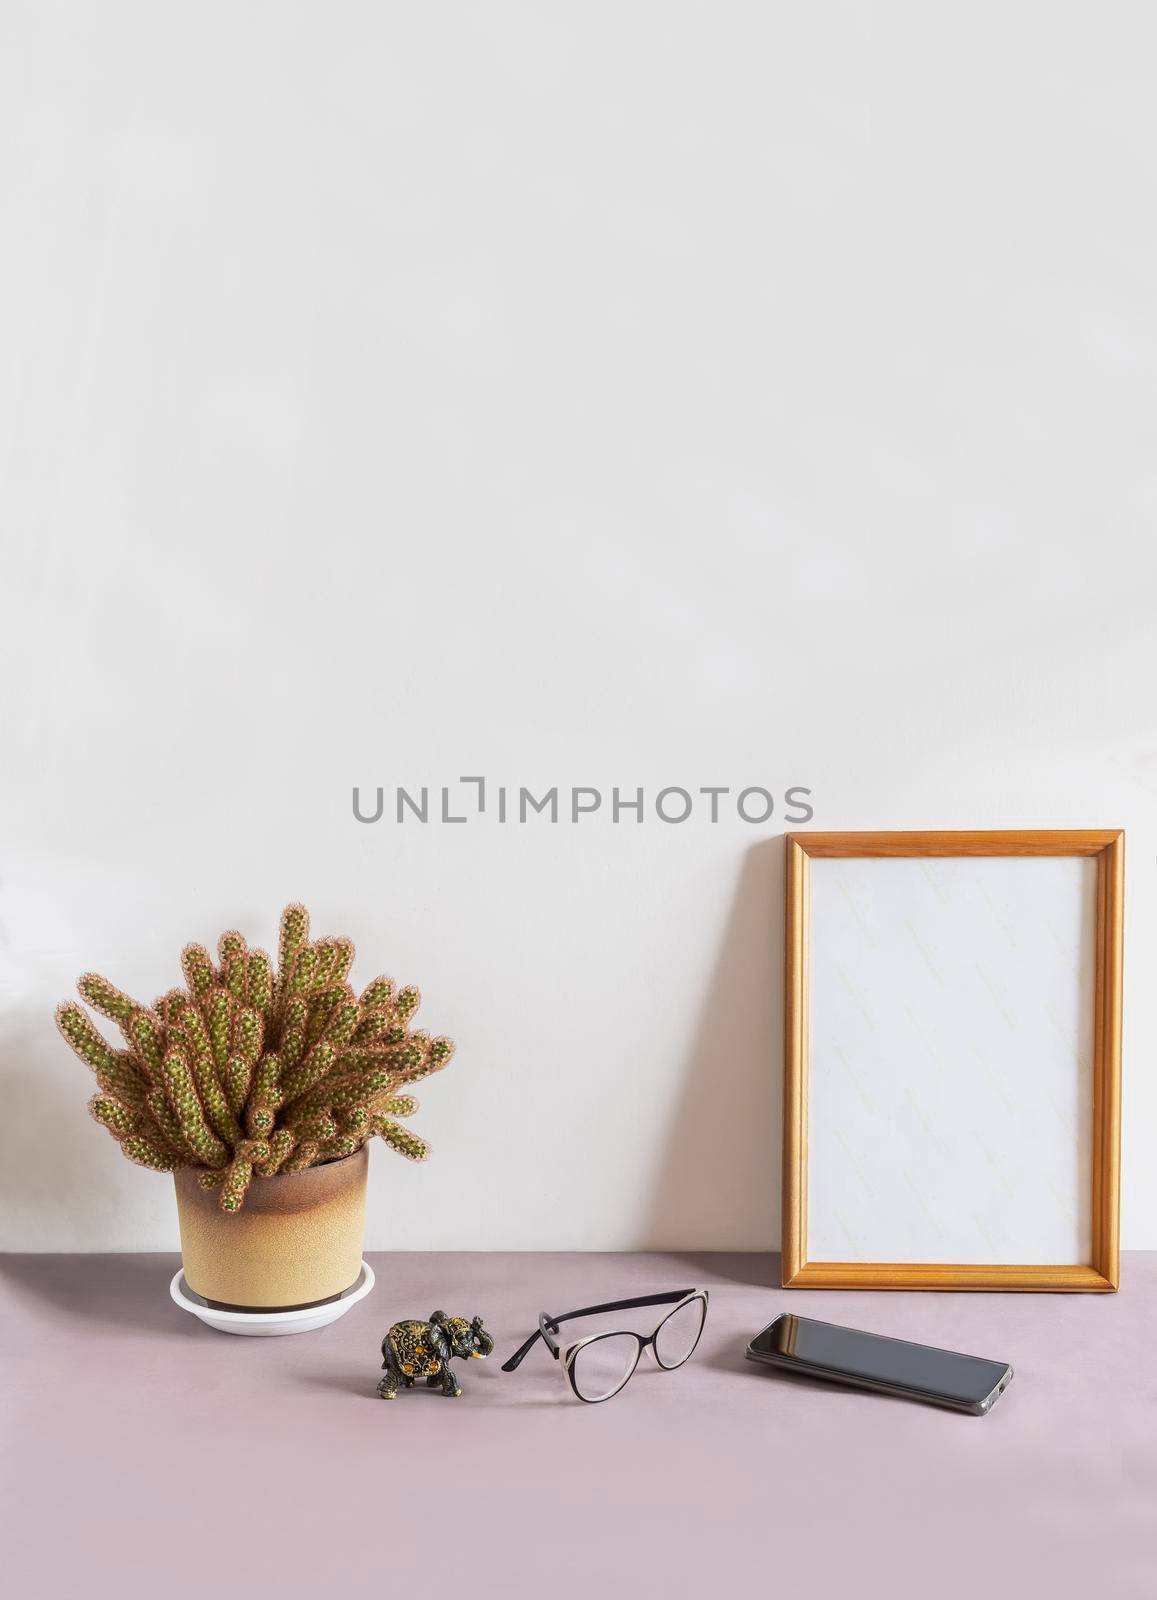 Wooden frame and indoor cactus flower on the table. by georgina198